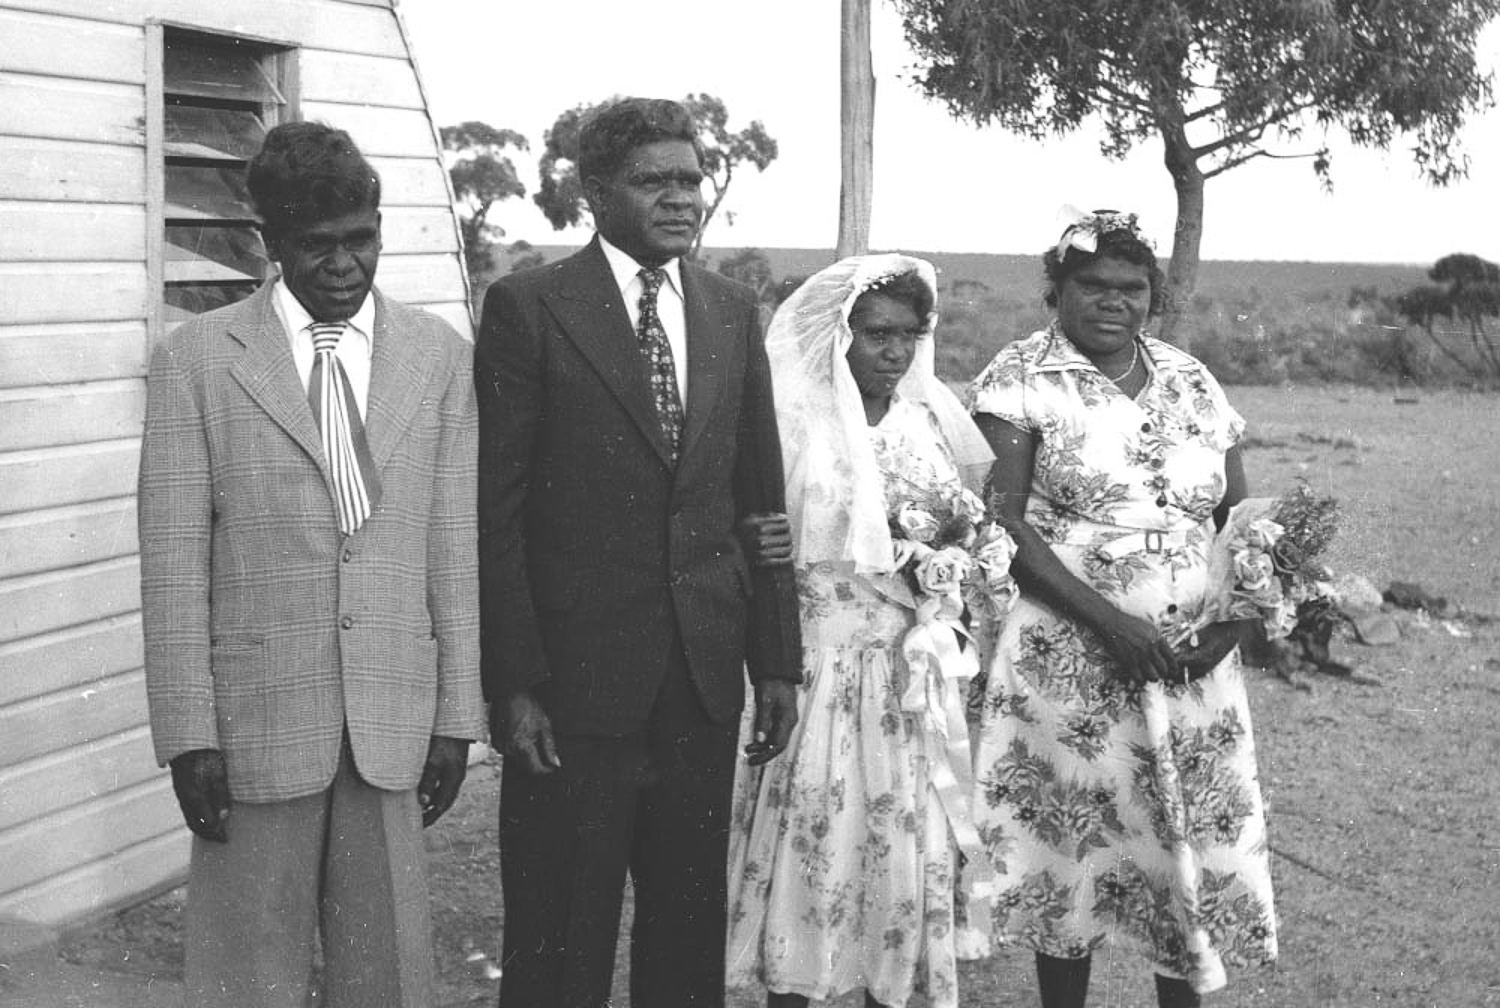 Don and May Sinclair on their wedding day. As the influence of the missionaries began to take hold, Anangu would adopt western cultural practices. The Sinclair’s children and grandchildren now live in Tjuntjuntjara.